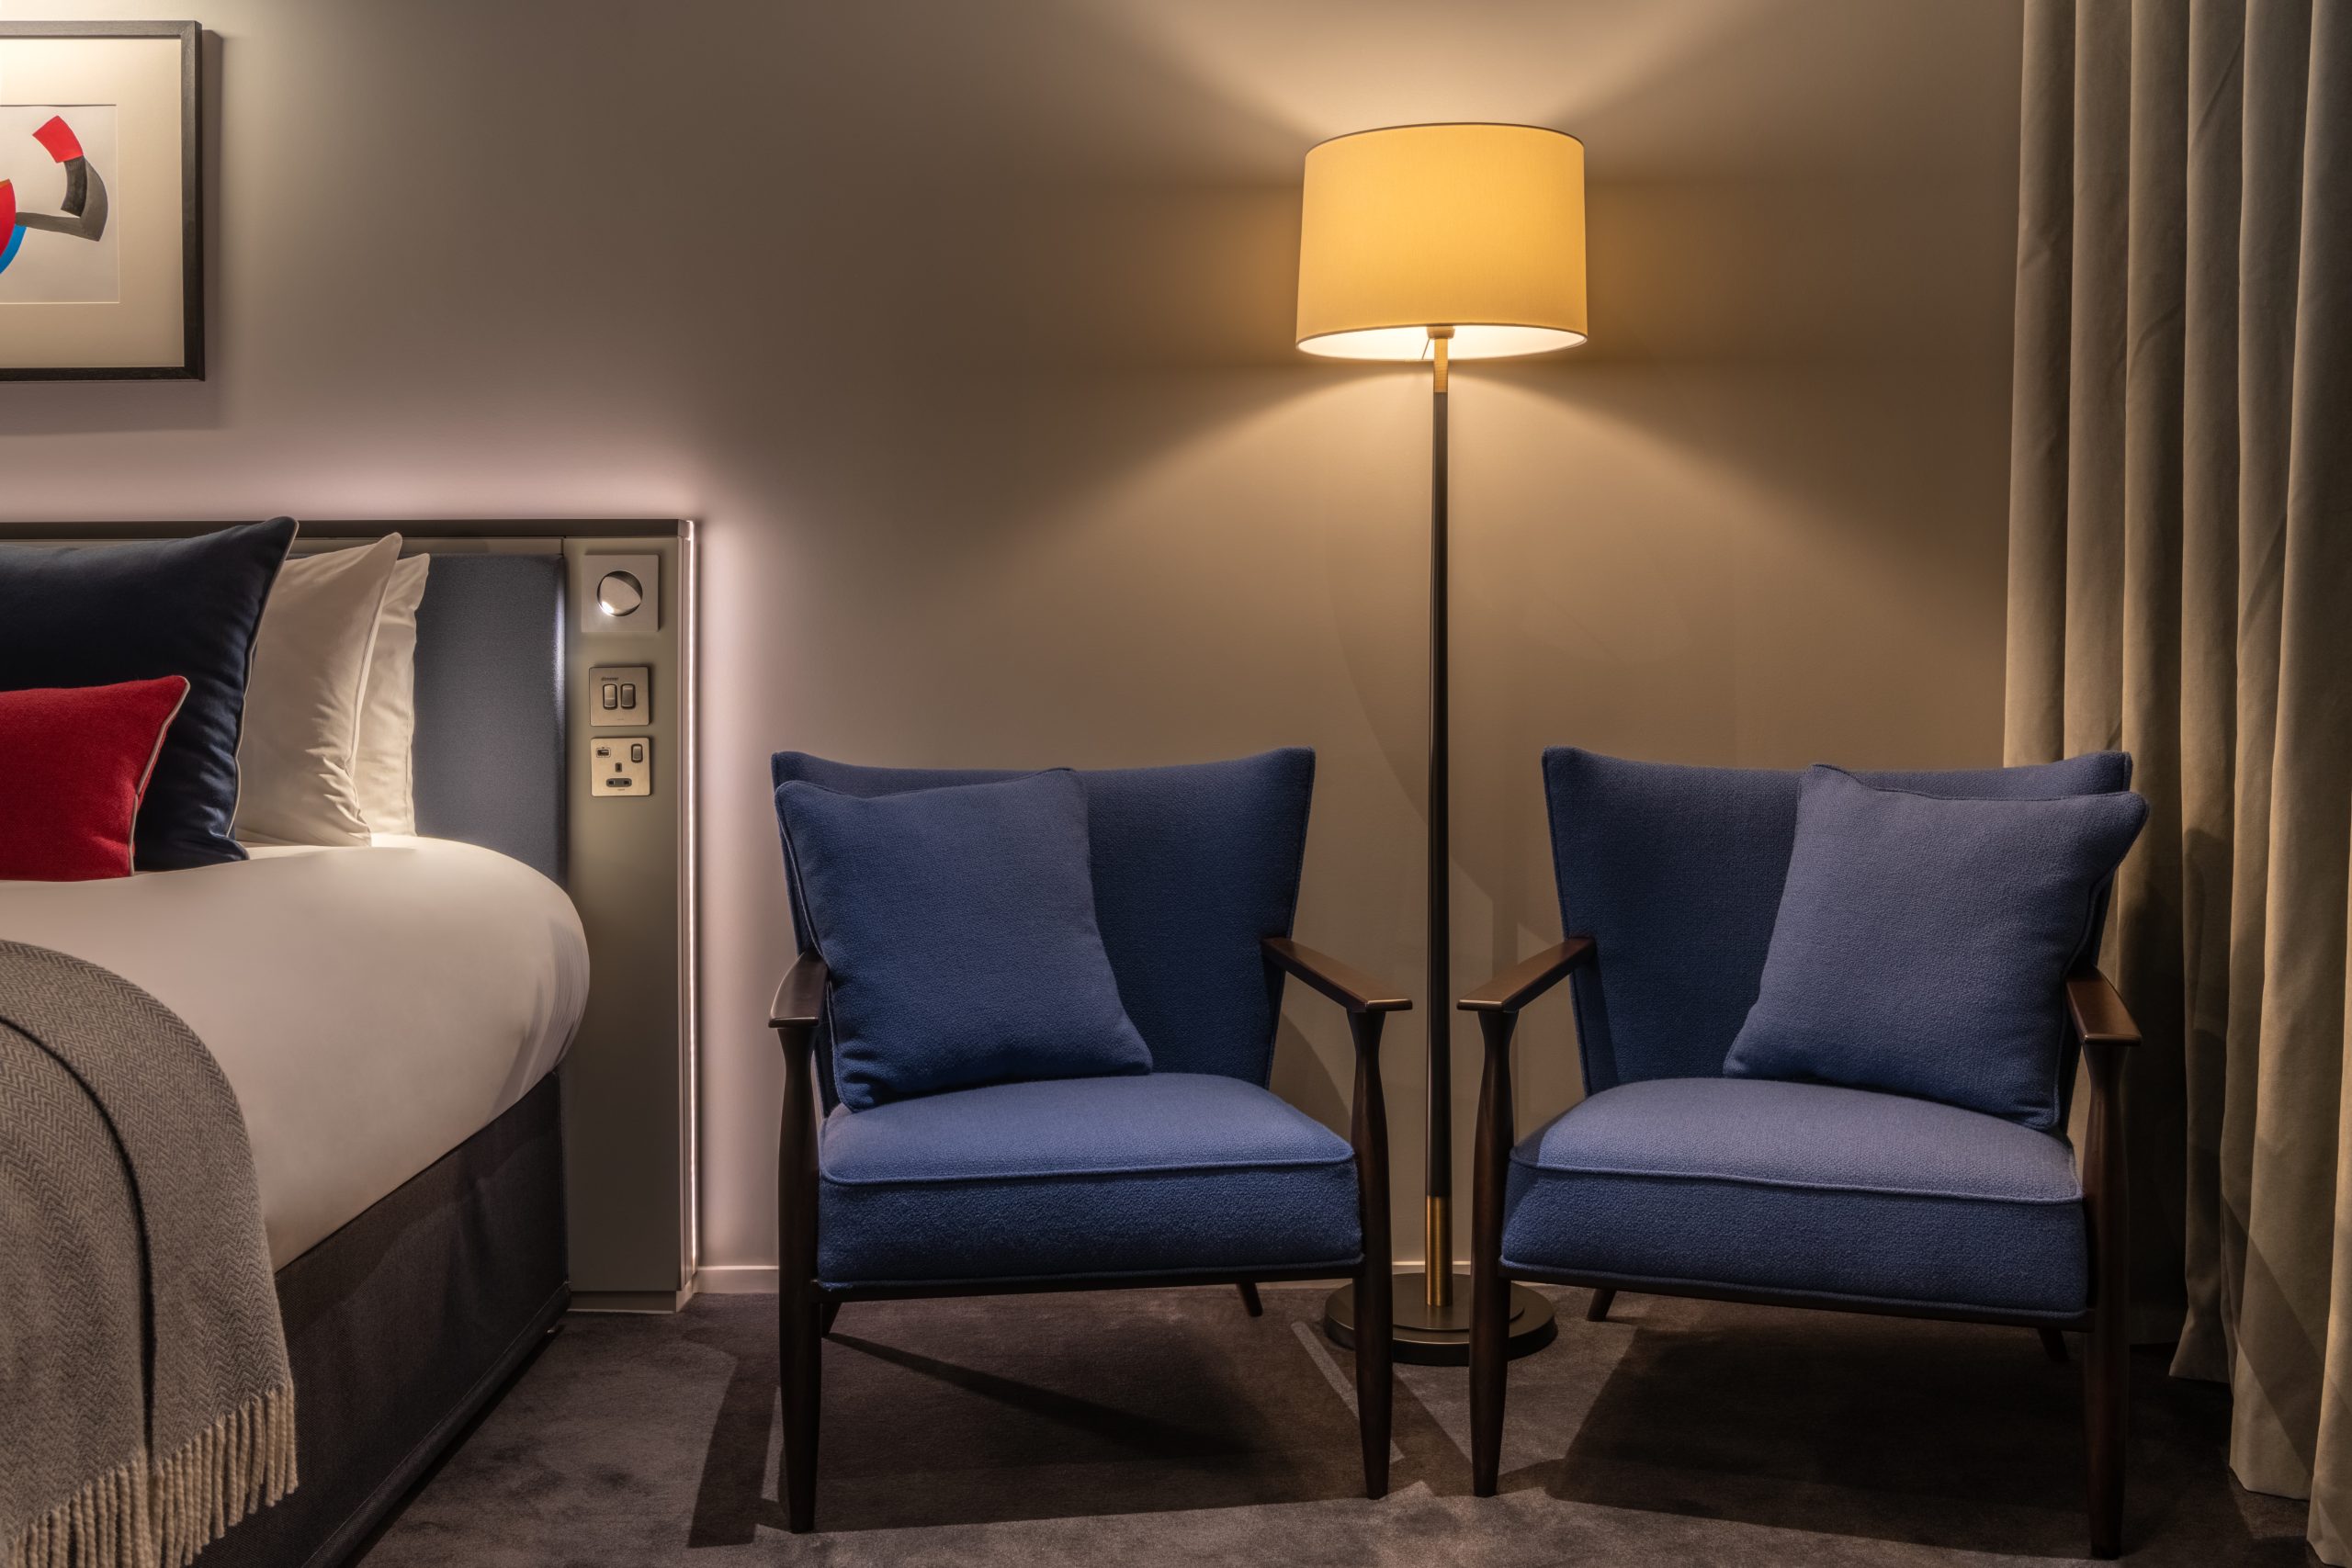 A junior suite with two arm chairs, located in Covent Garden.